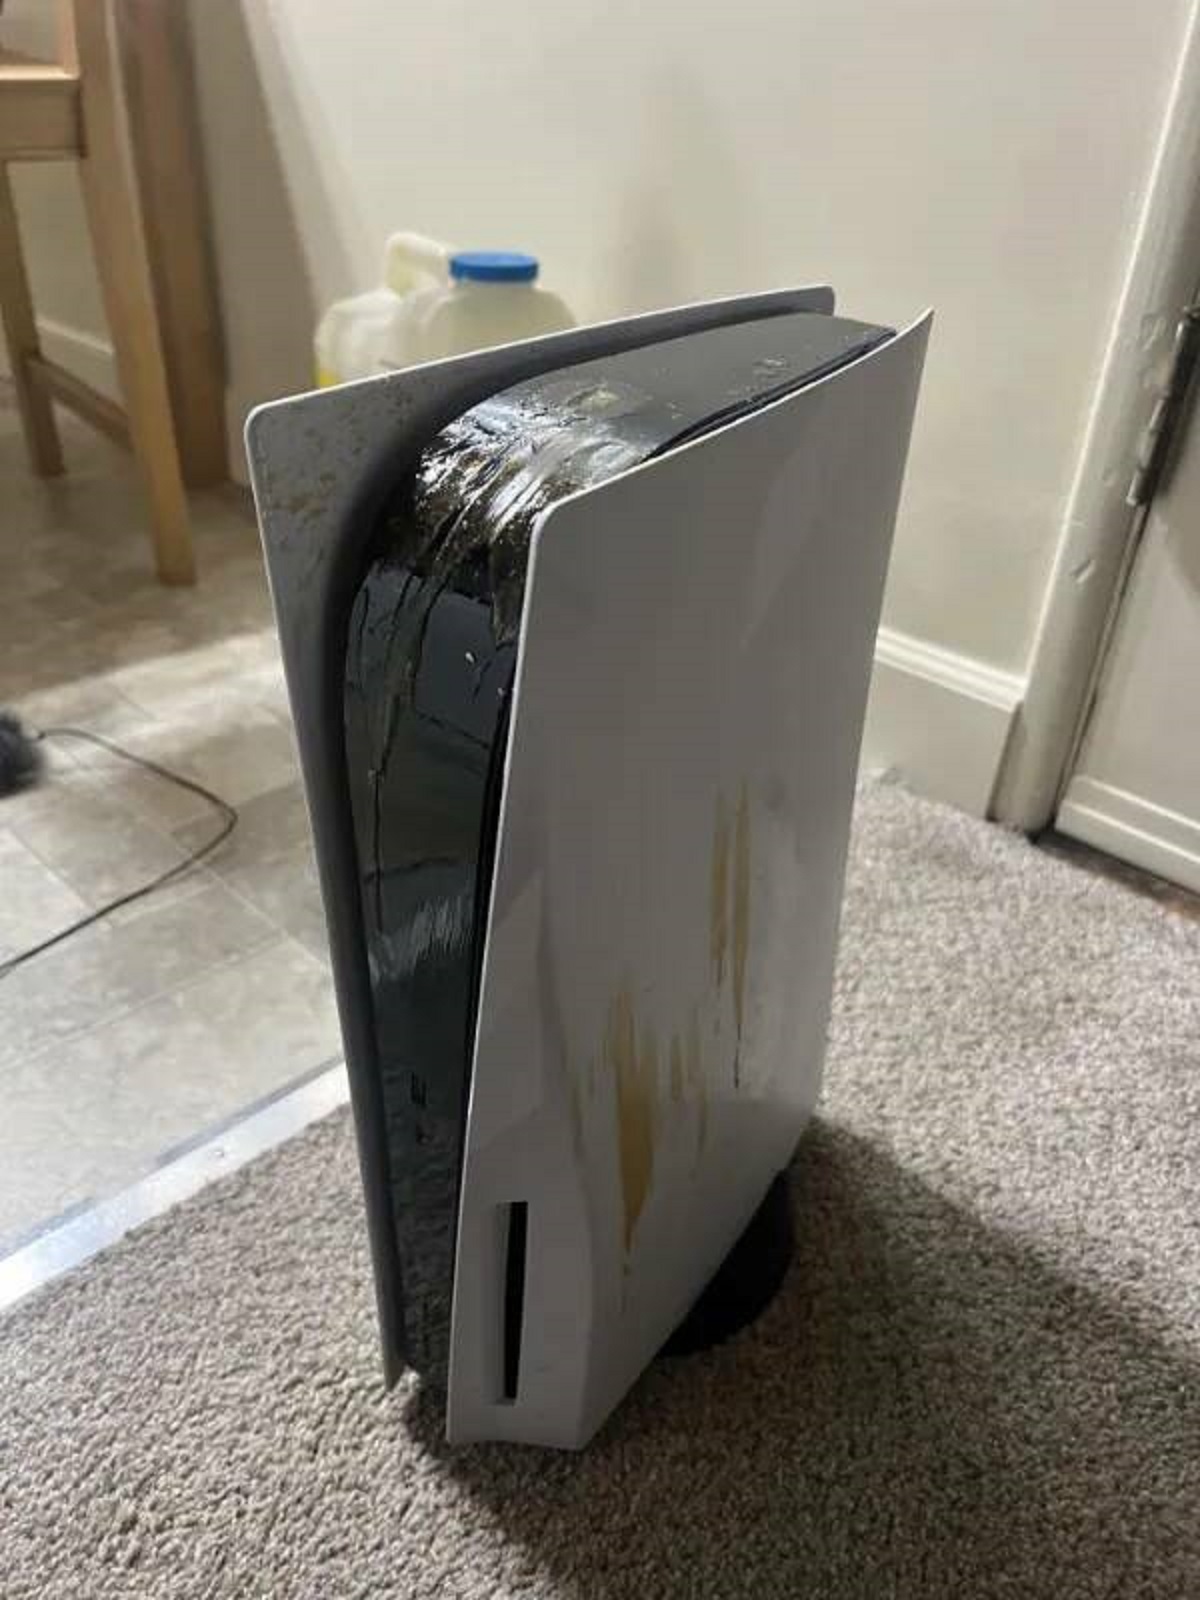 “GF accidentally spilled hot wax on PS5”